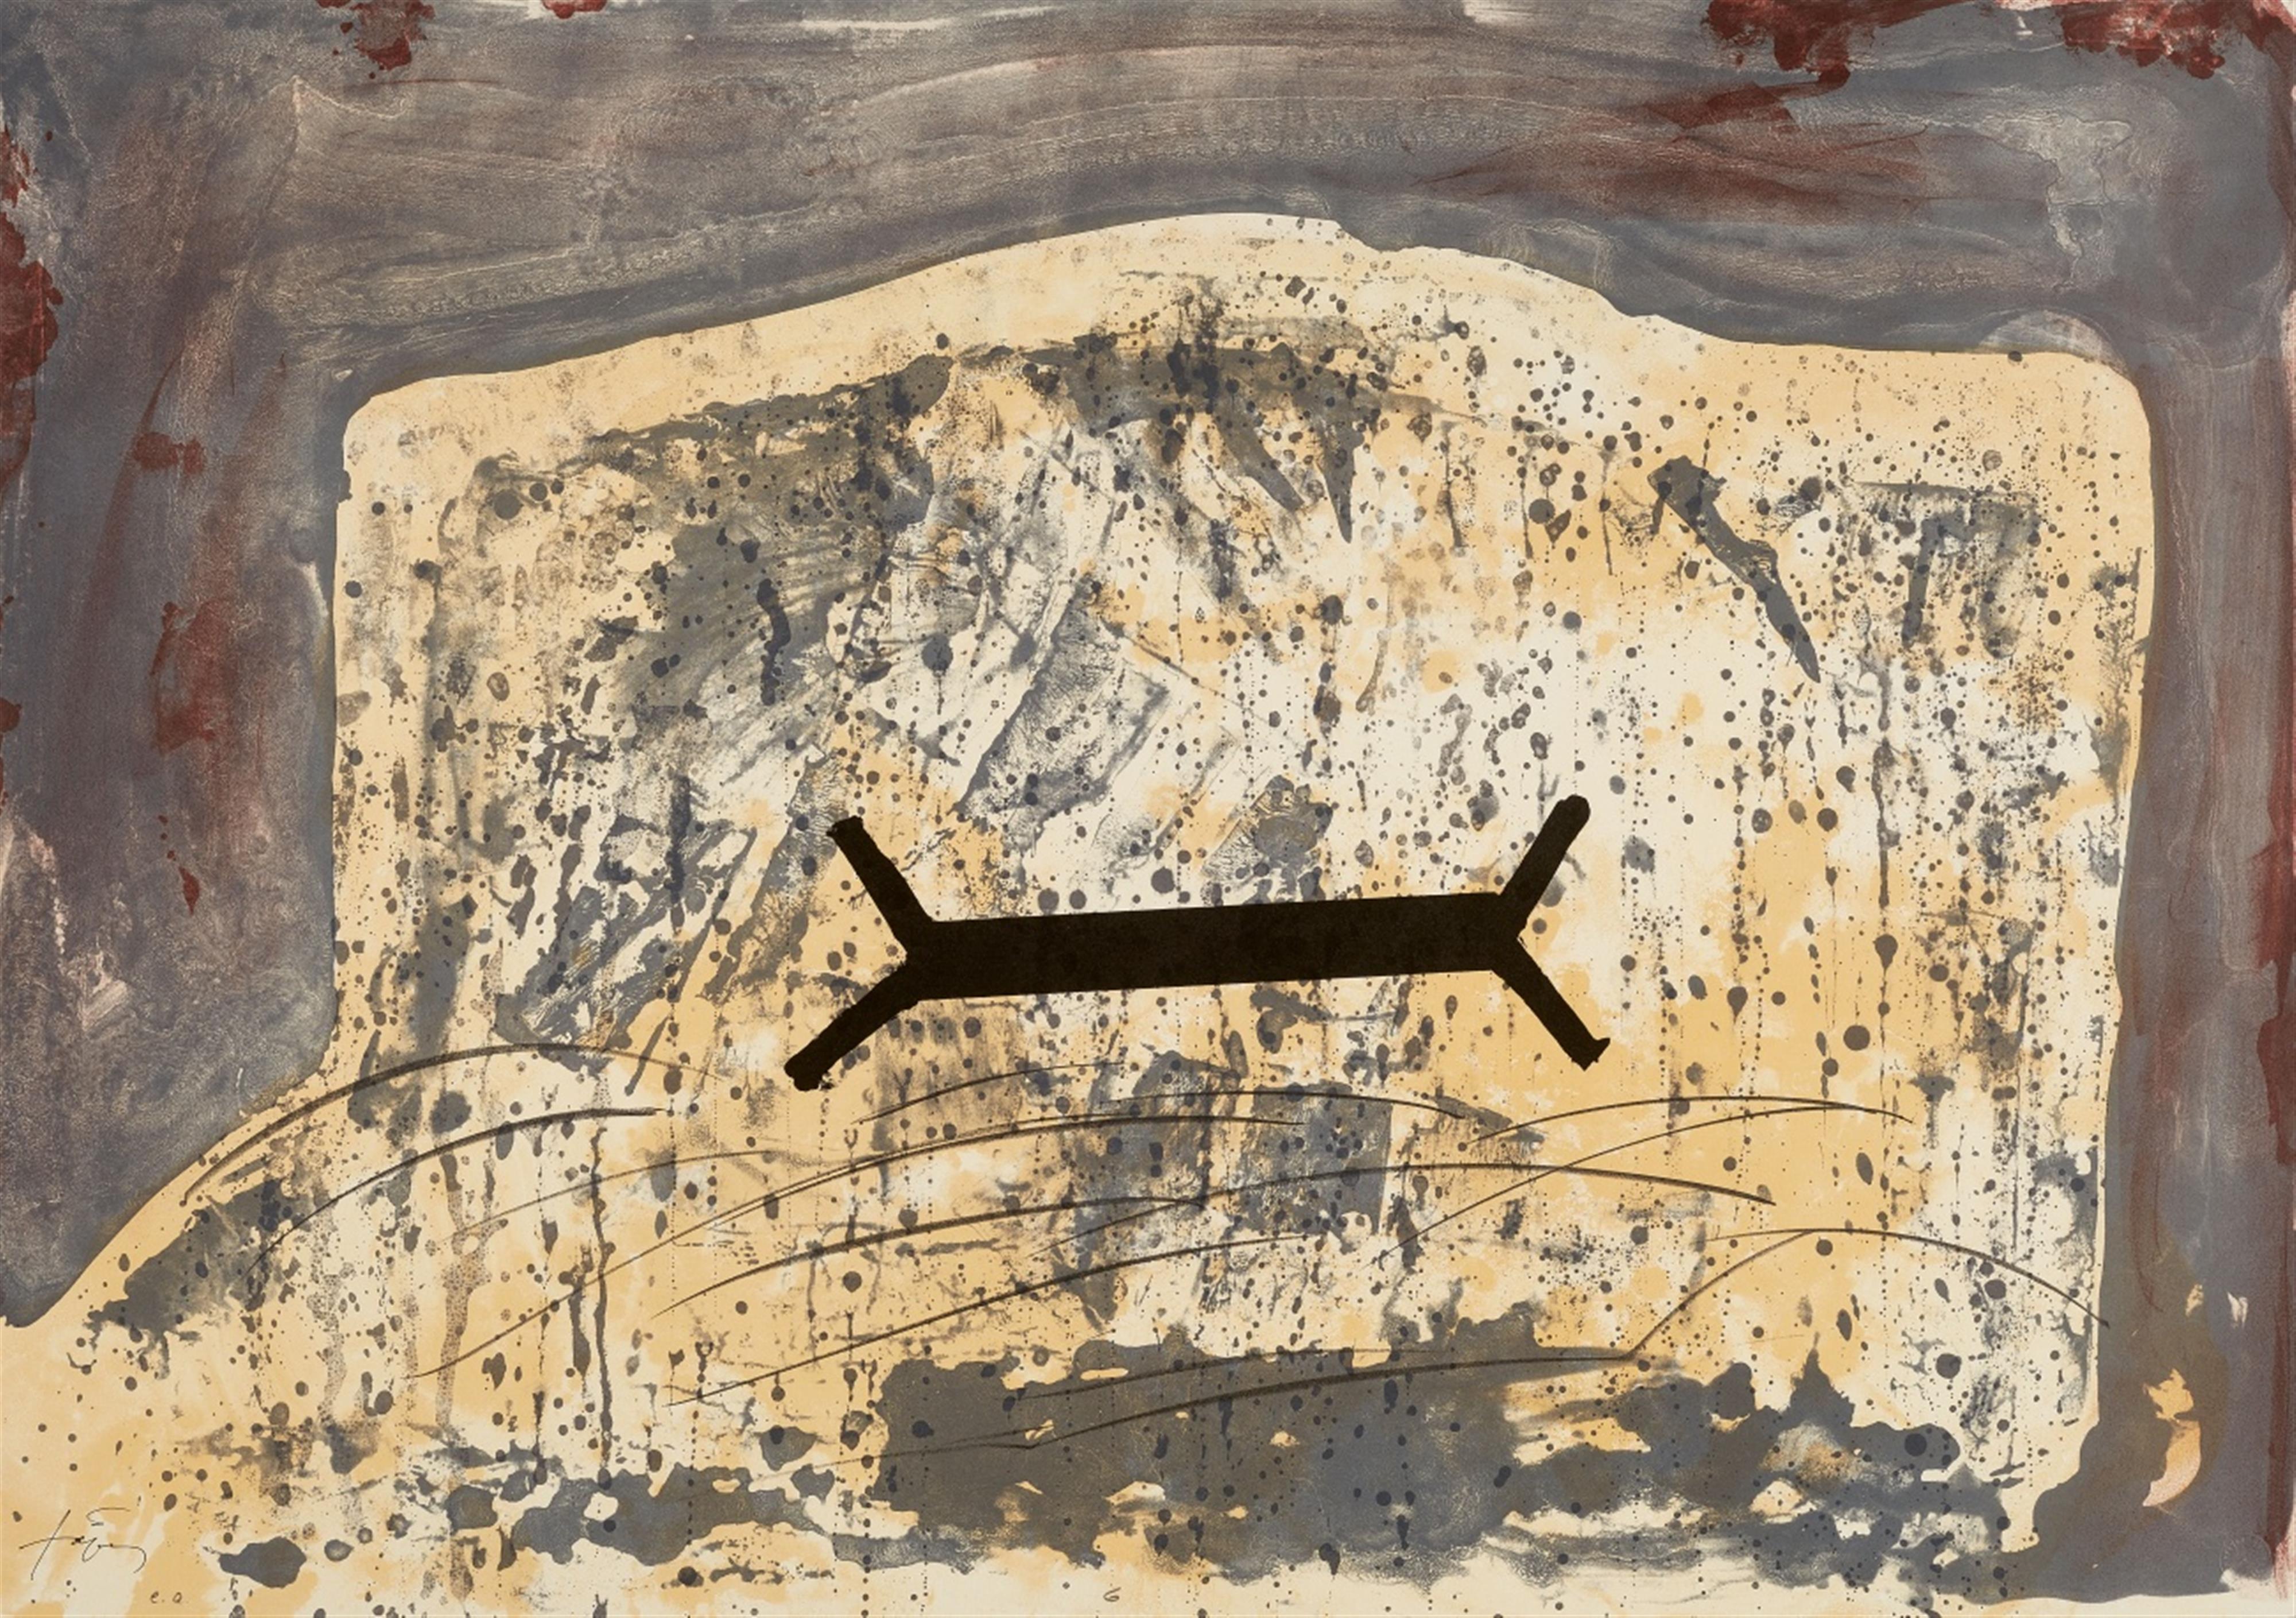 Antoni Tàpies - From Suite: plate 6 - image-1